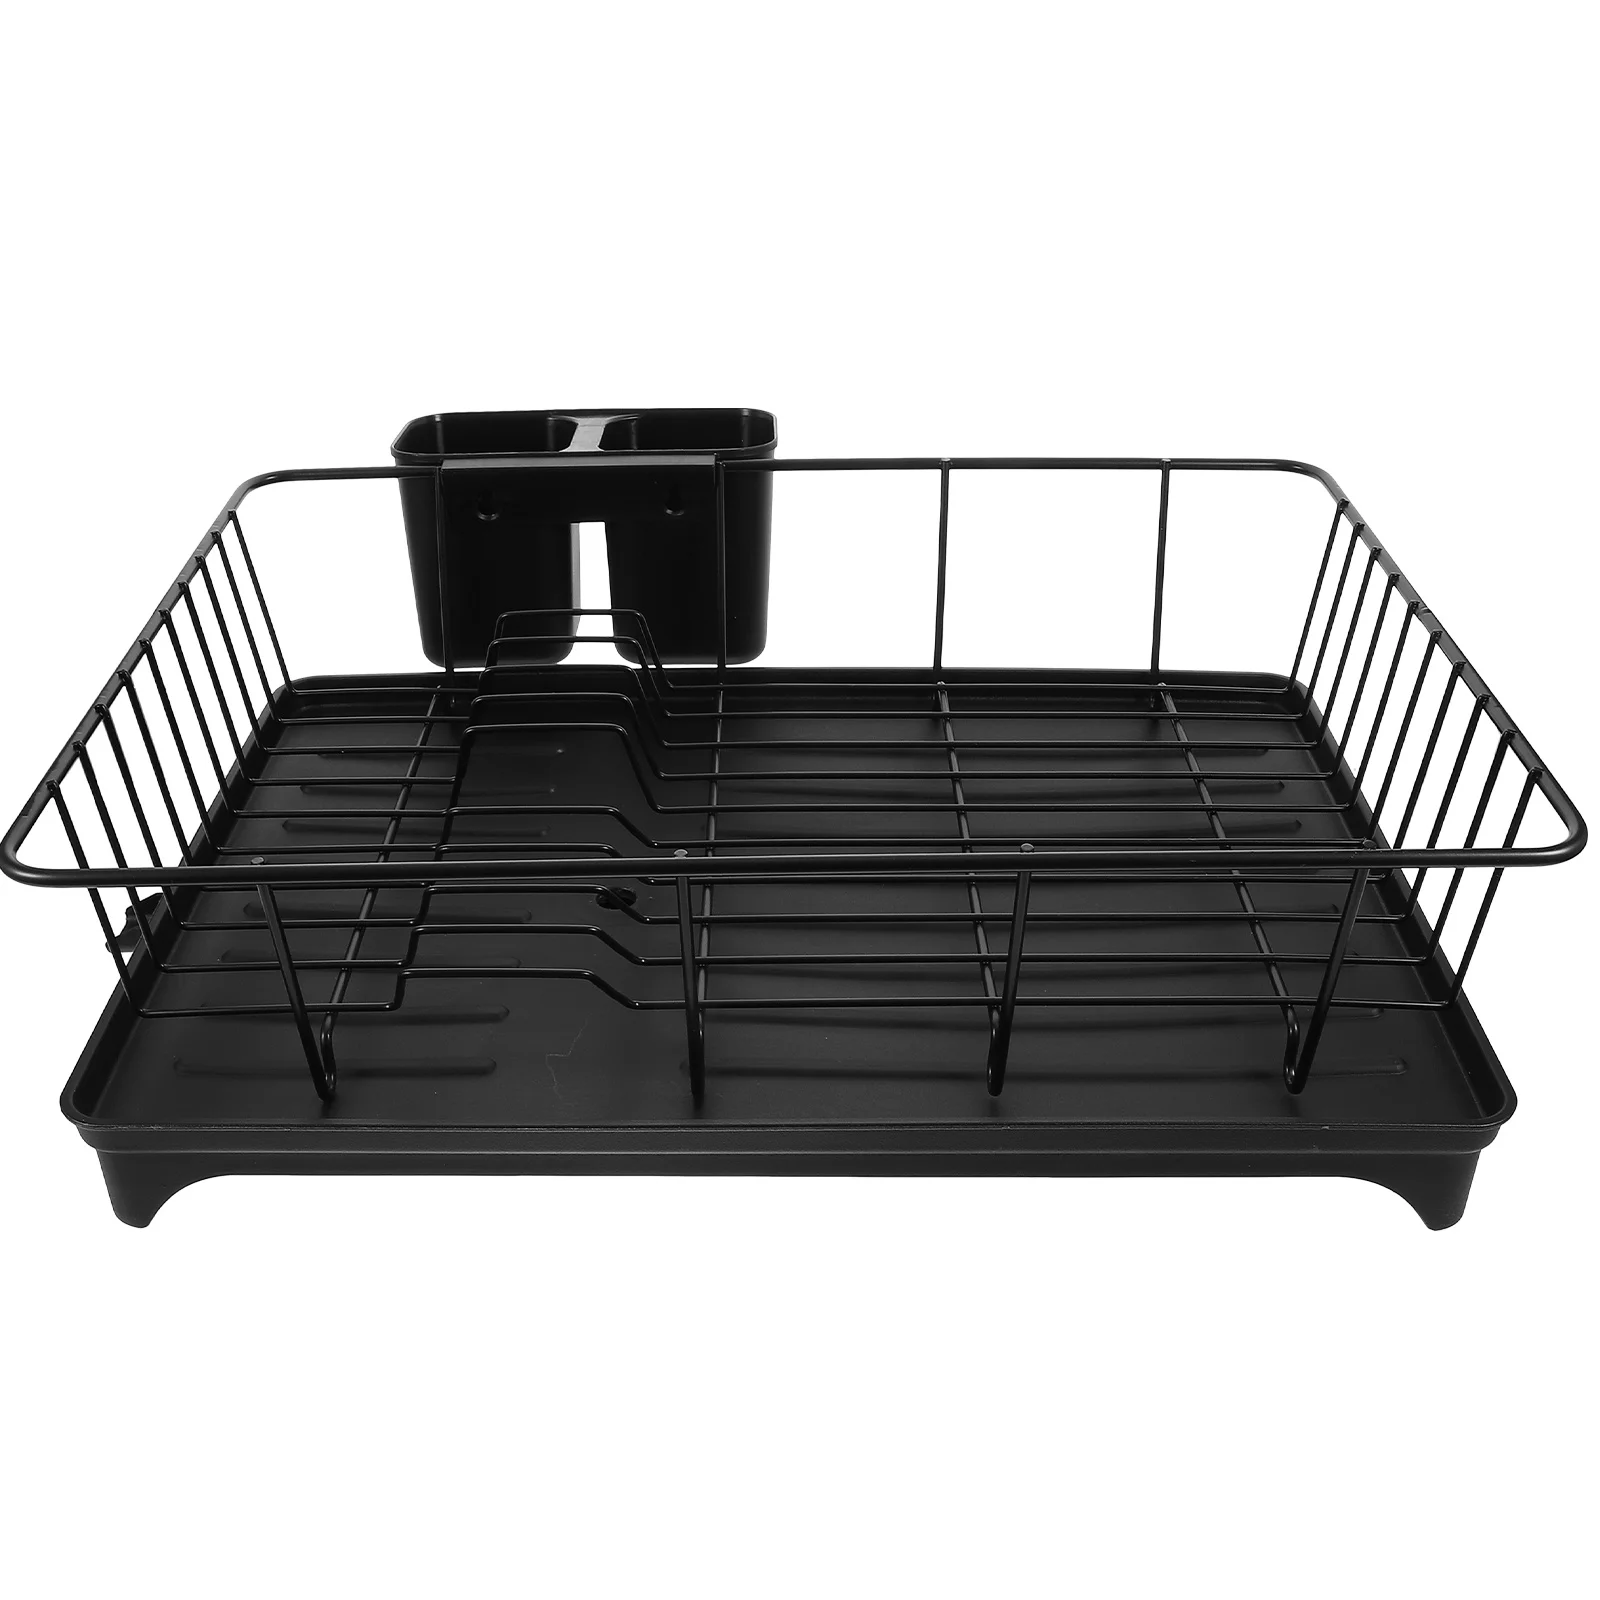 

Dish Rack Drying Cutlery Holder Racks Kitchen Counter Clothes Sink Strainers Dishes Multifunction Drain Drainer Islands